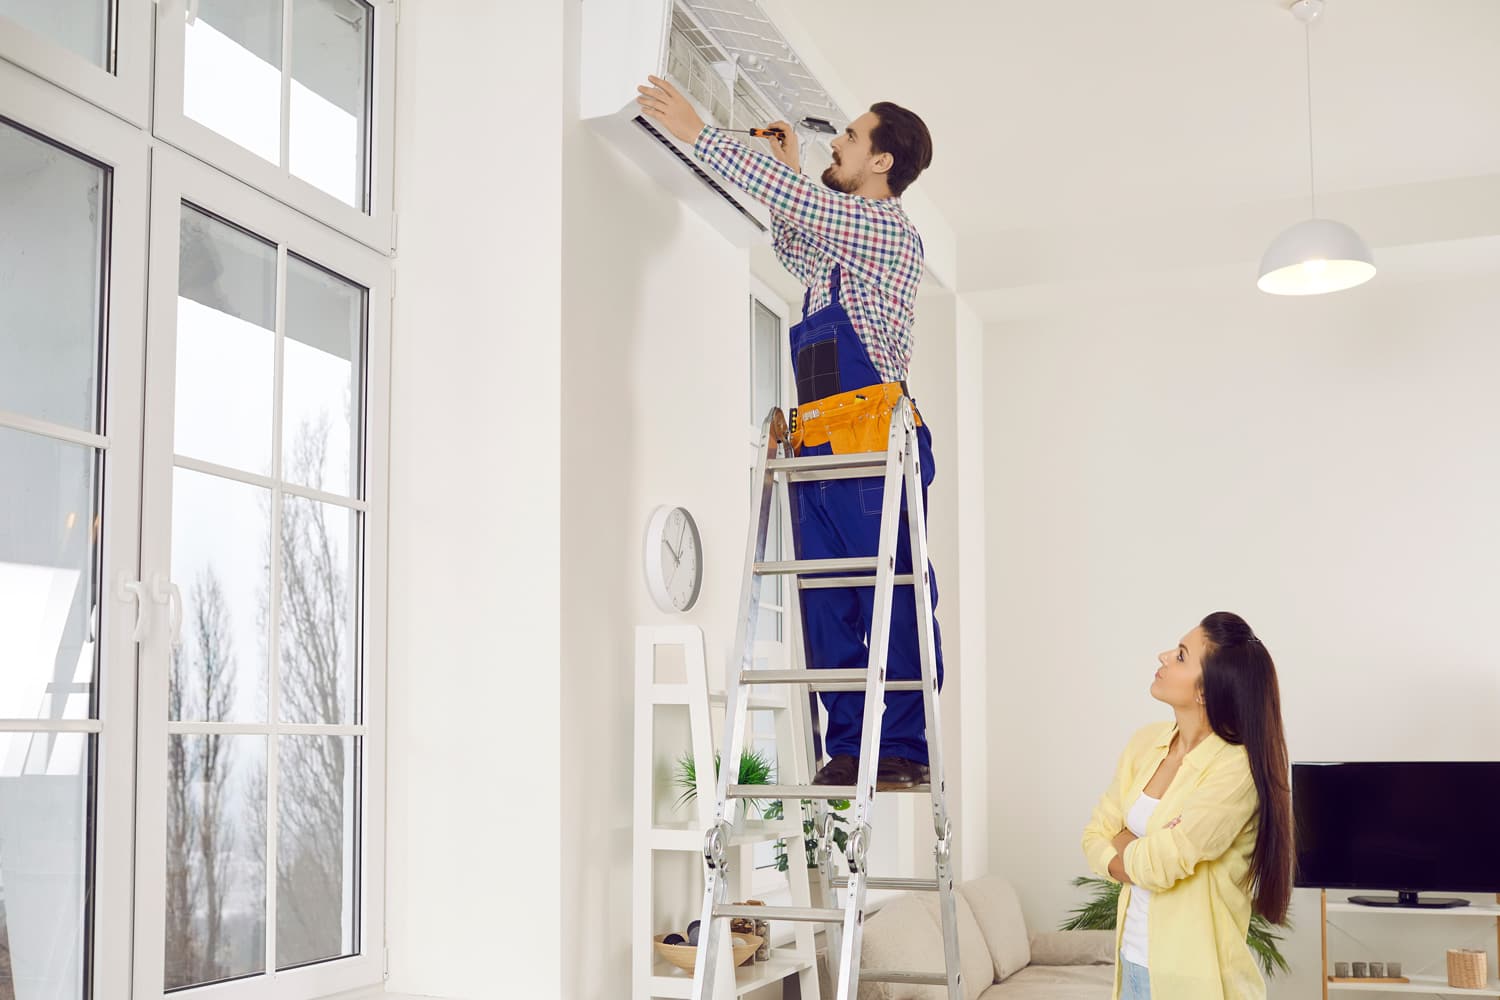 Technician repairing AC at work. Repair service guy standing on ladder in young lady's home and opening up modern white wall mounted air conditioner in order to check, do disinfection or fix troubles